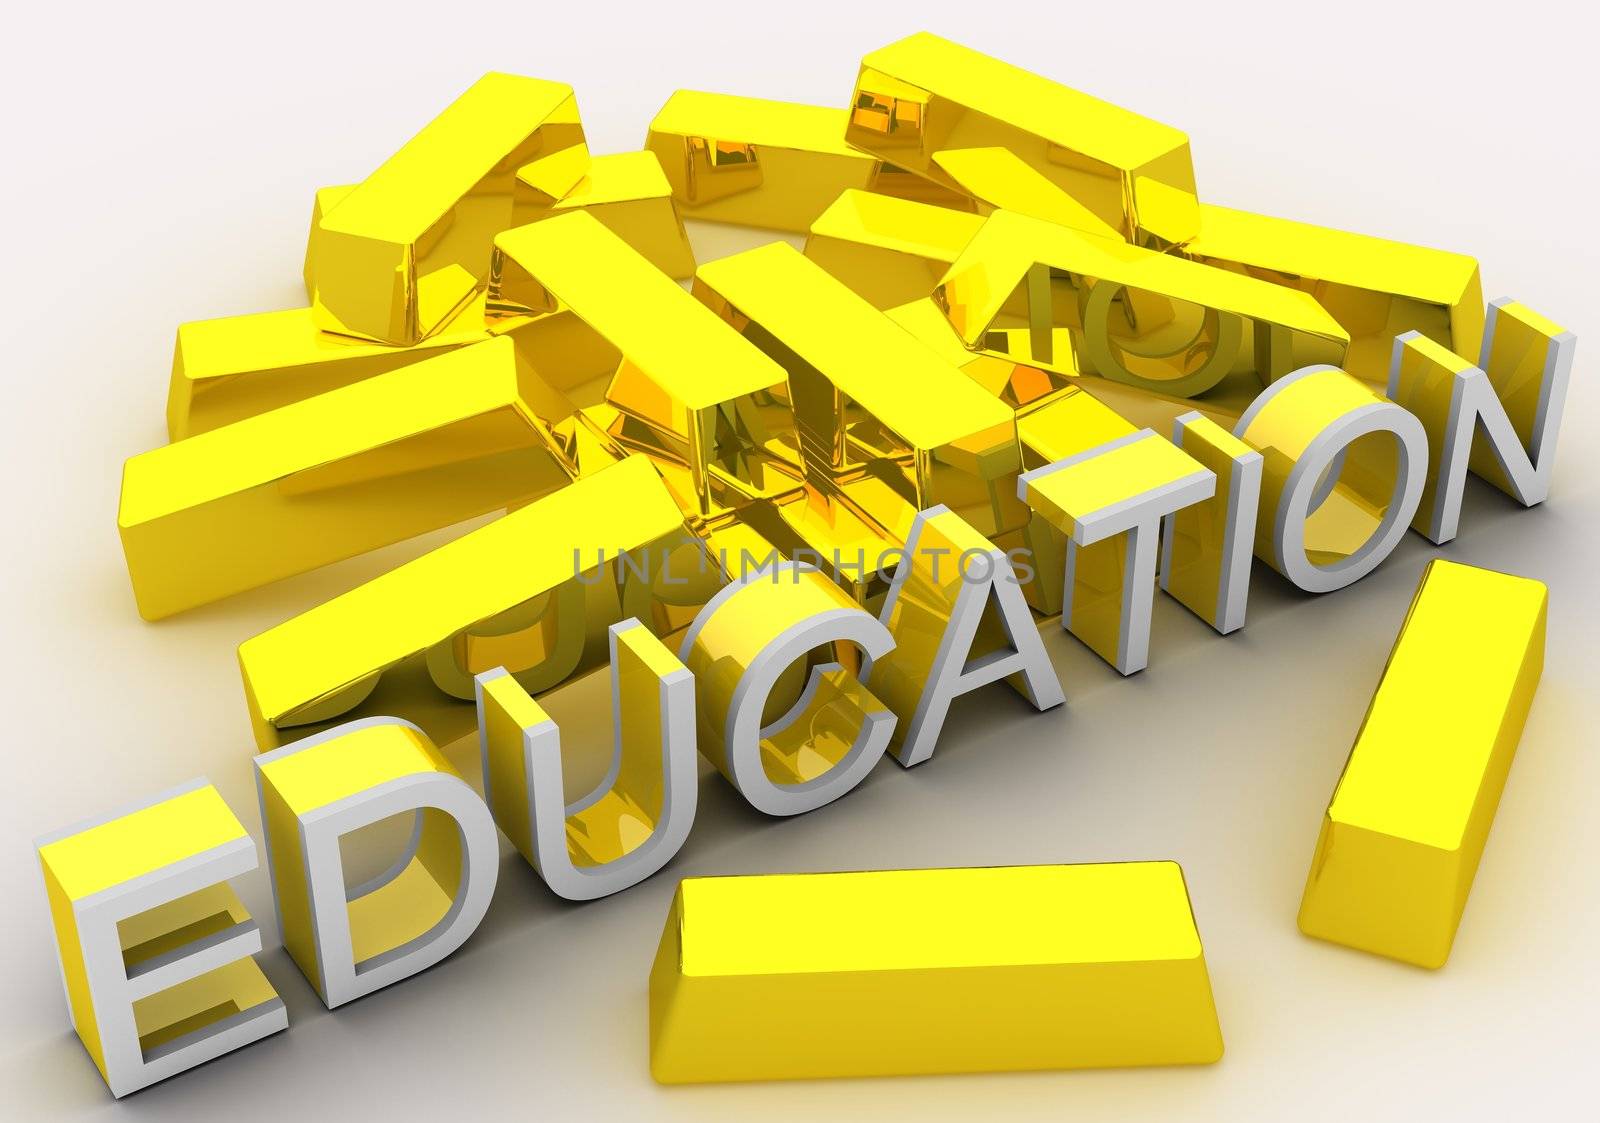 Concept of valuable education and how education level positively affects salary. Idea is portrayed by English 3d text (EDUCATION) placed in front of a lot of golden bars. Alternatively it can be also symbolizing high study expenses. Text and its letters are rendered in golden color. Whole scene is rendered and isolated on white background.